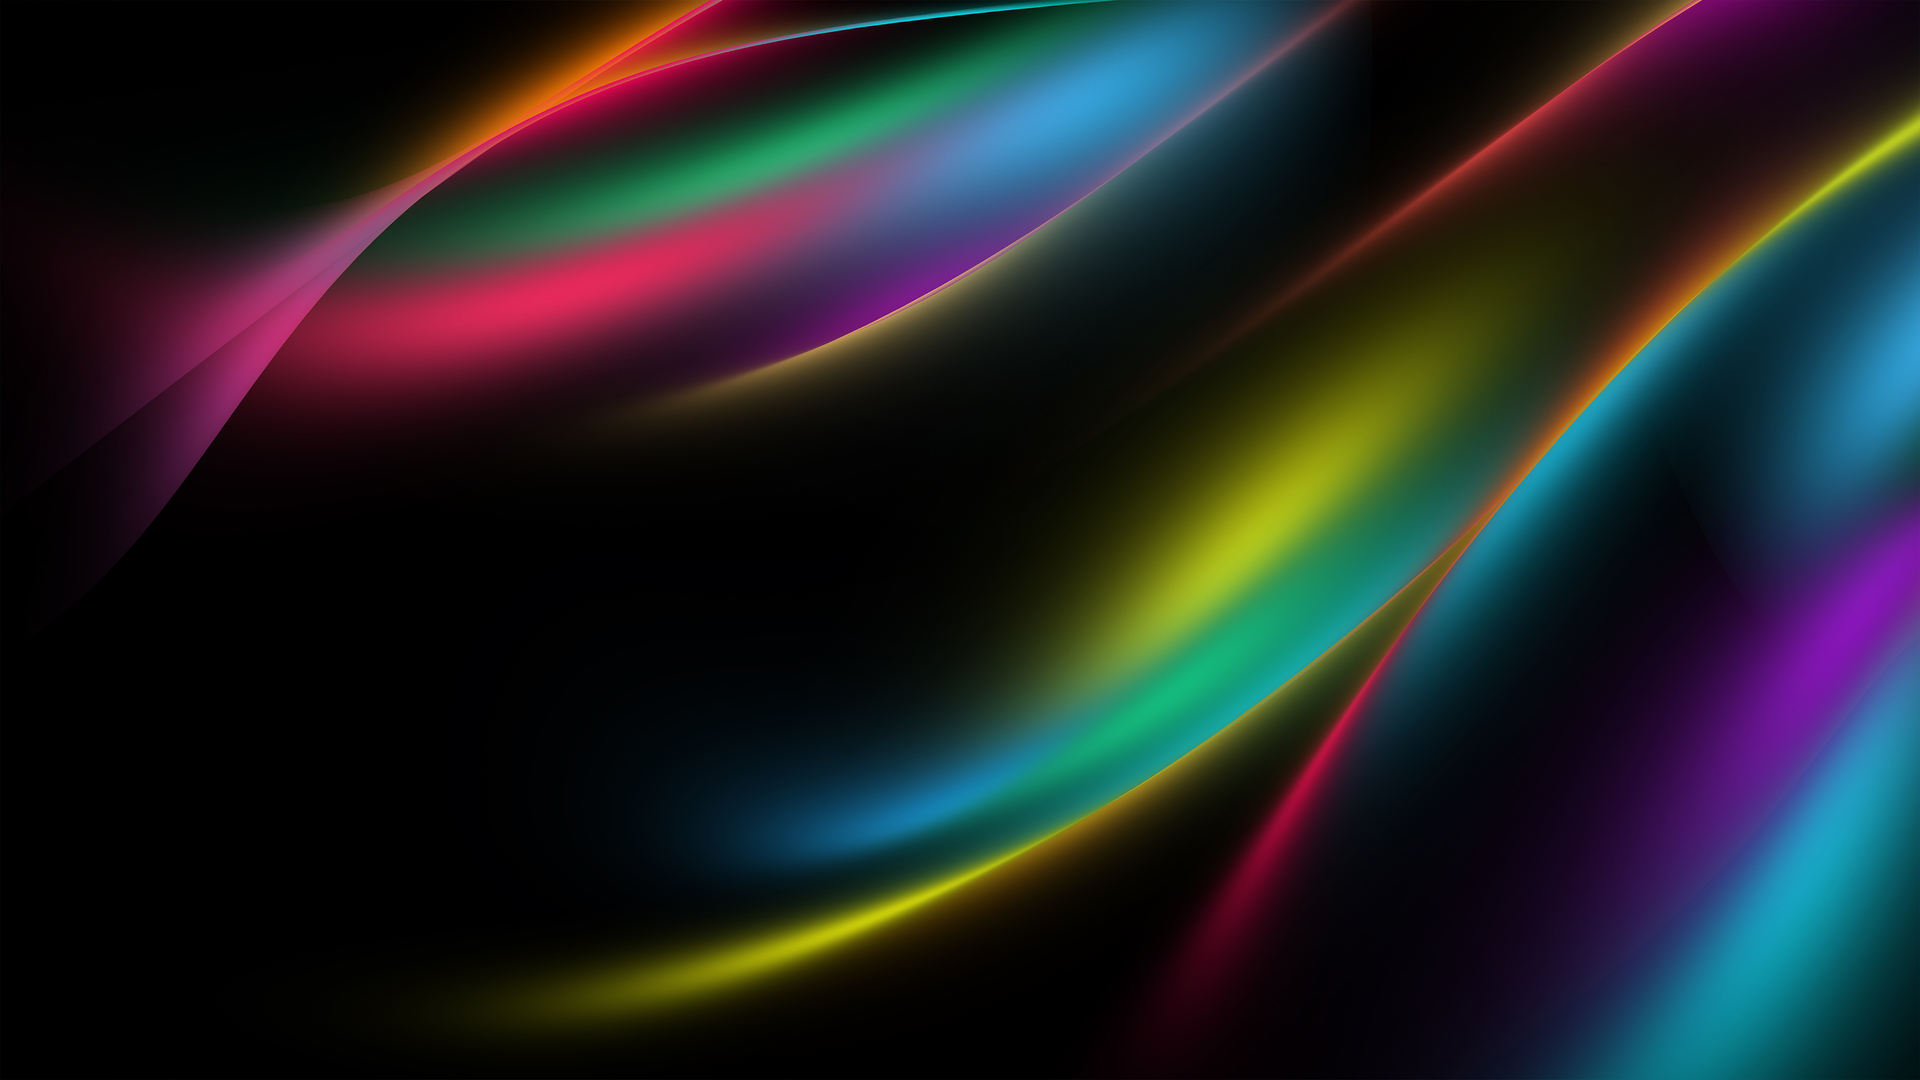 Abstract Curtain Flow HD Wallpaper 